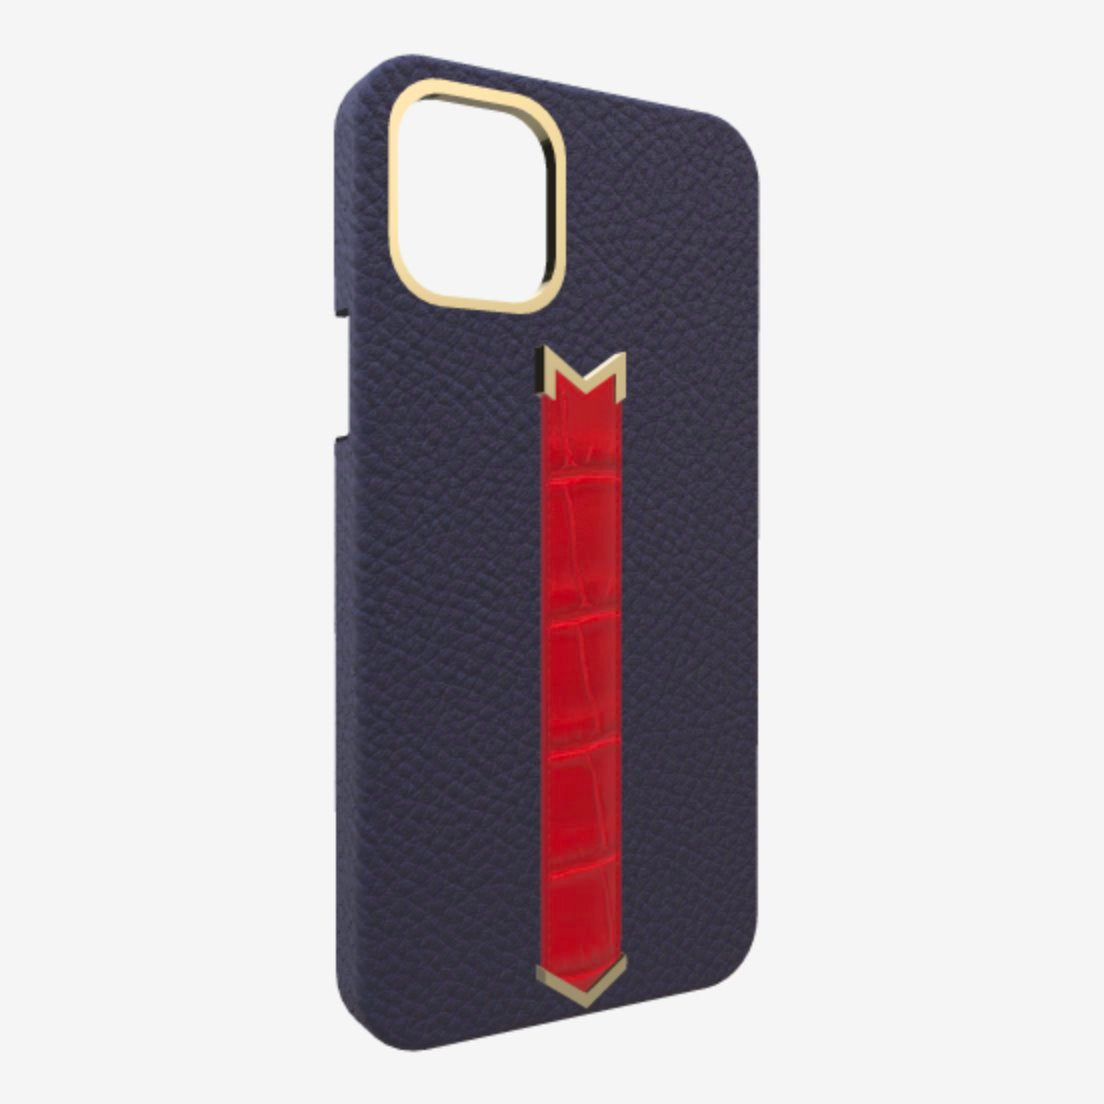 Gold Finger Strap Case for iPhone 13 Pro Max in Genuine Calfskin and Alligator Navy Blue Glamour Red 